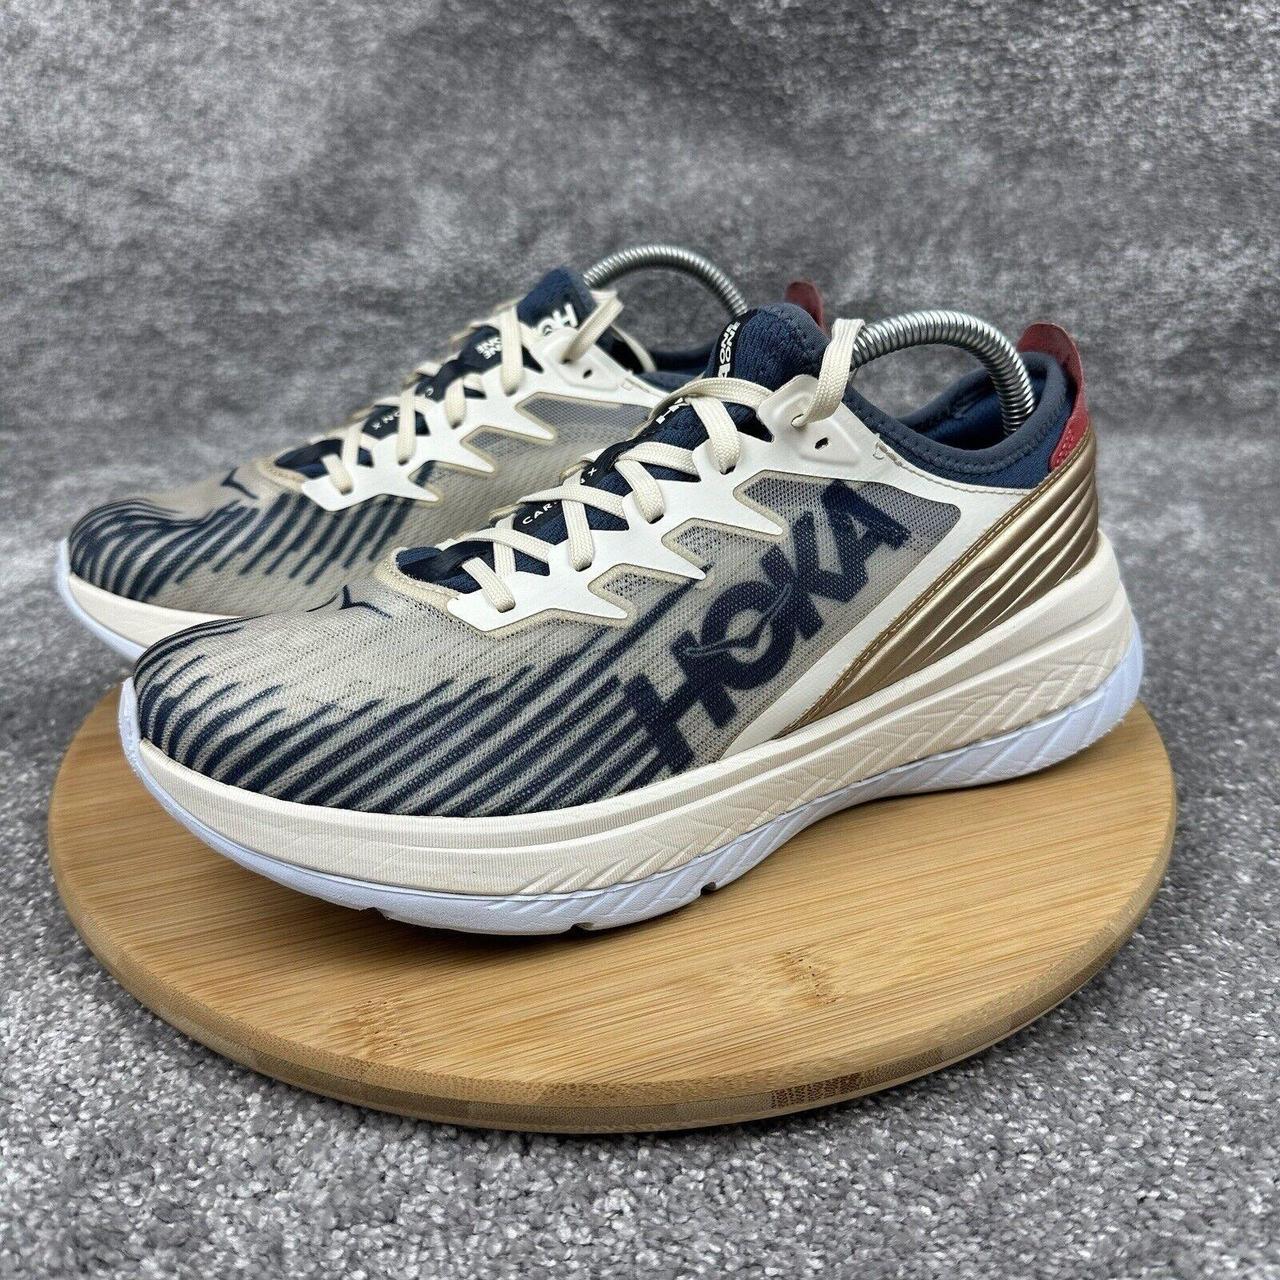 HOKA One One Carbon X-Spe Running Shoes